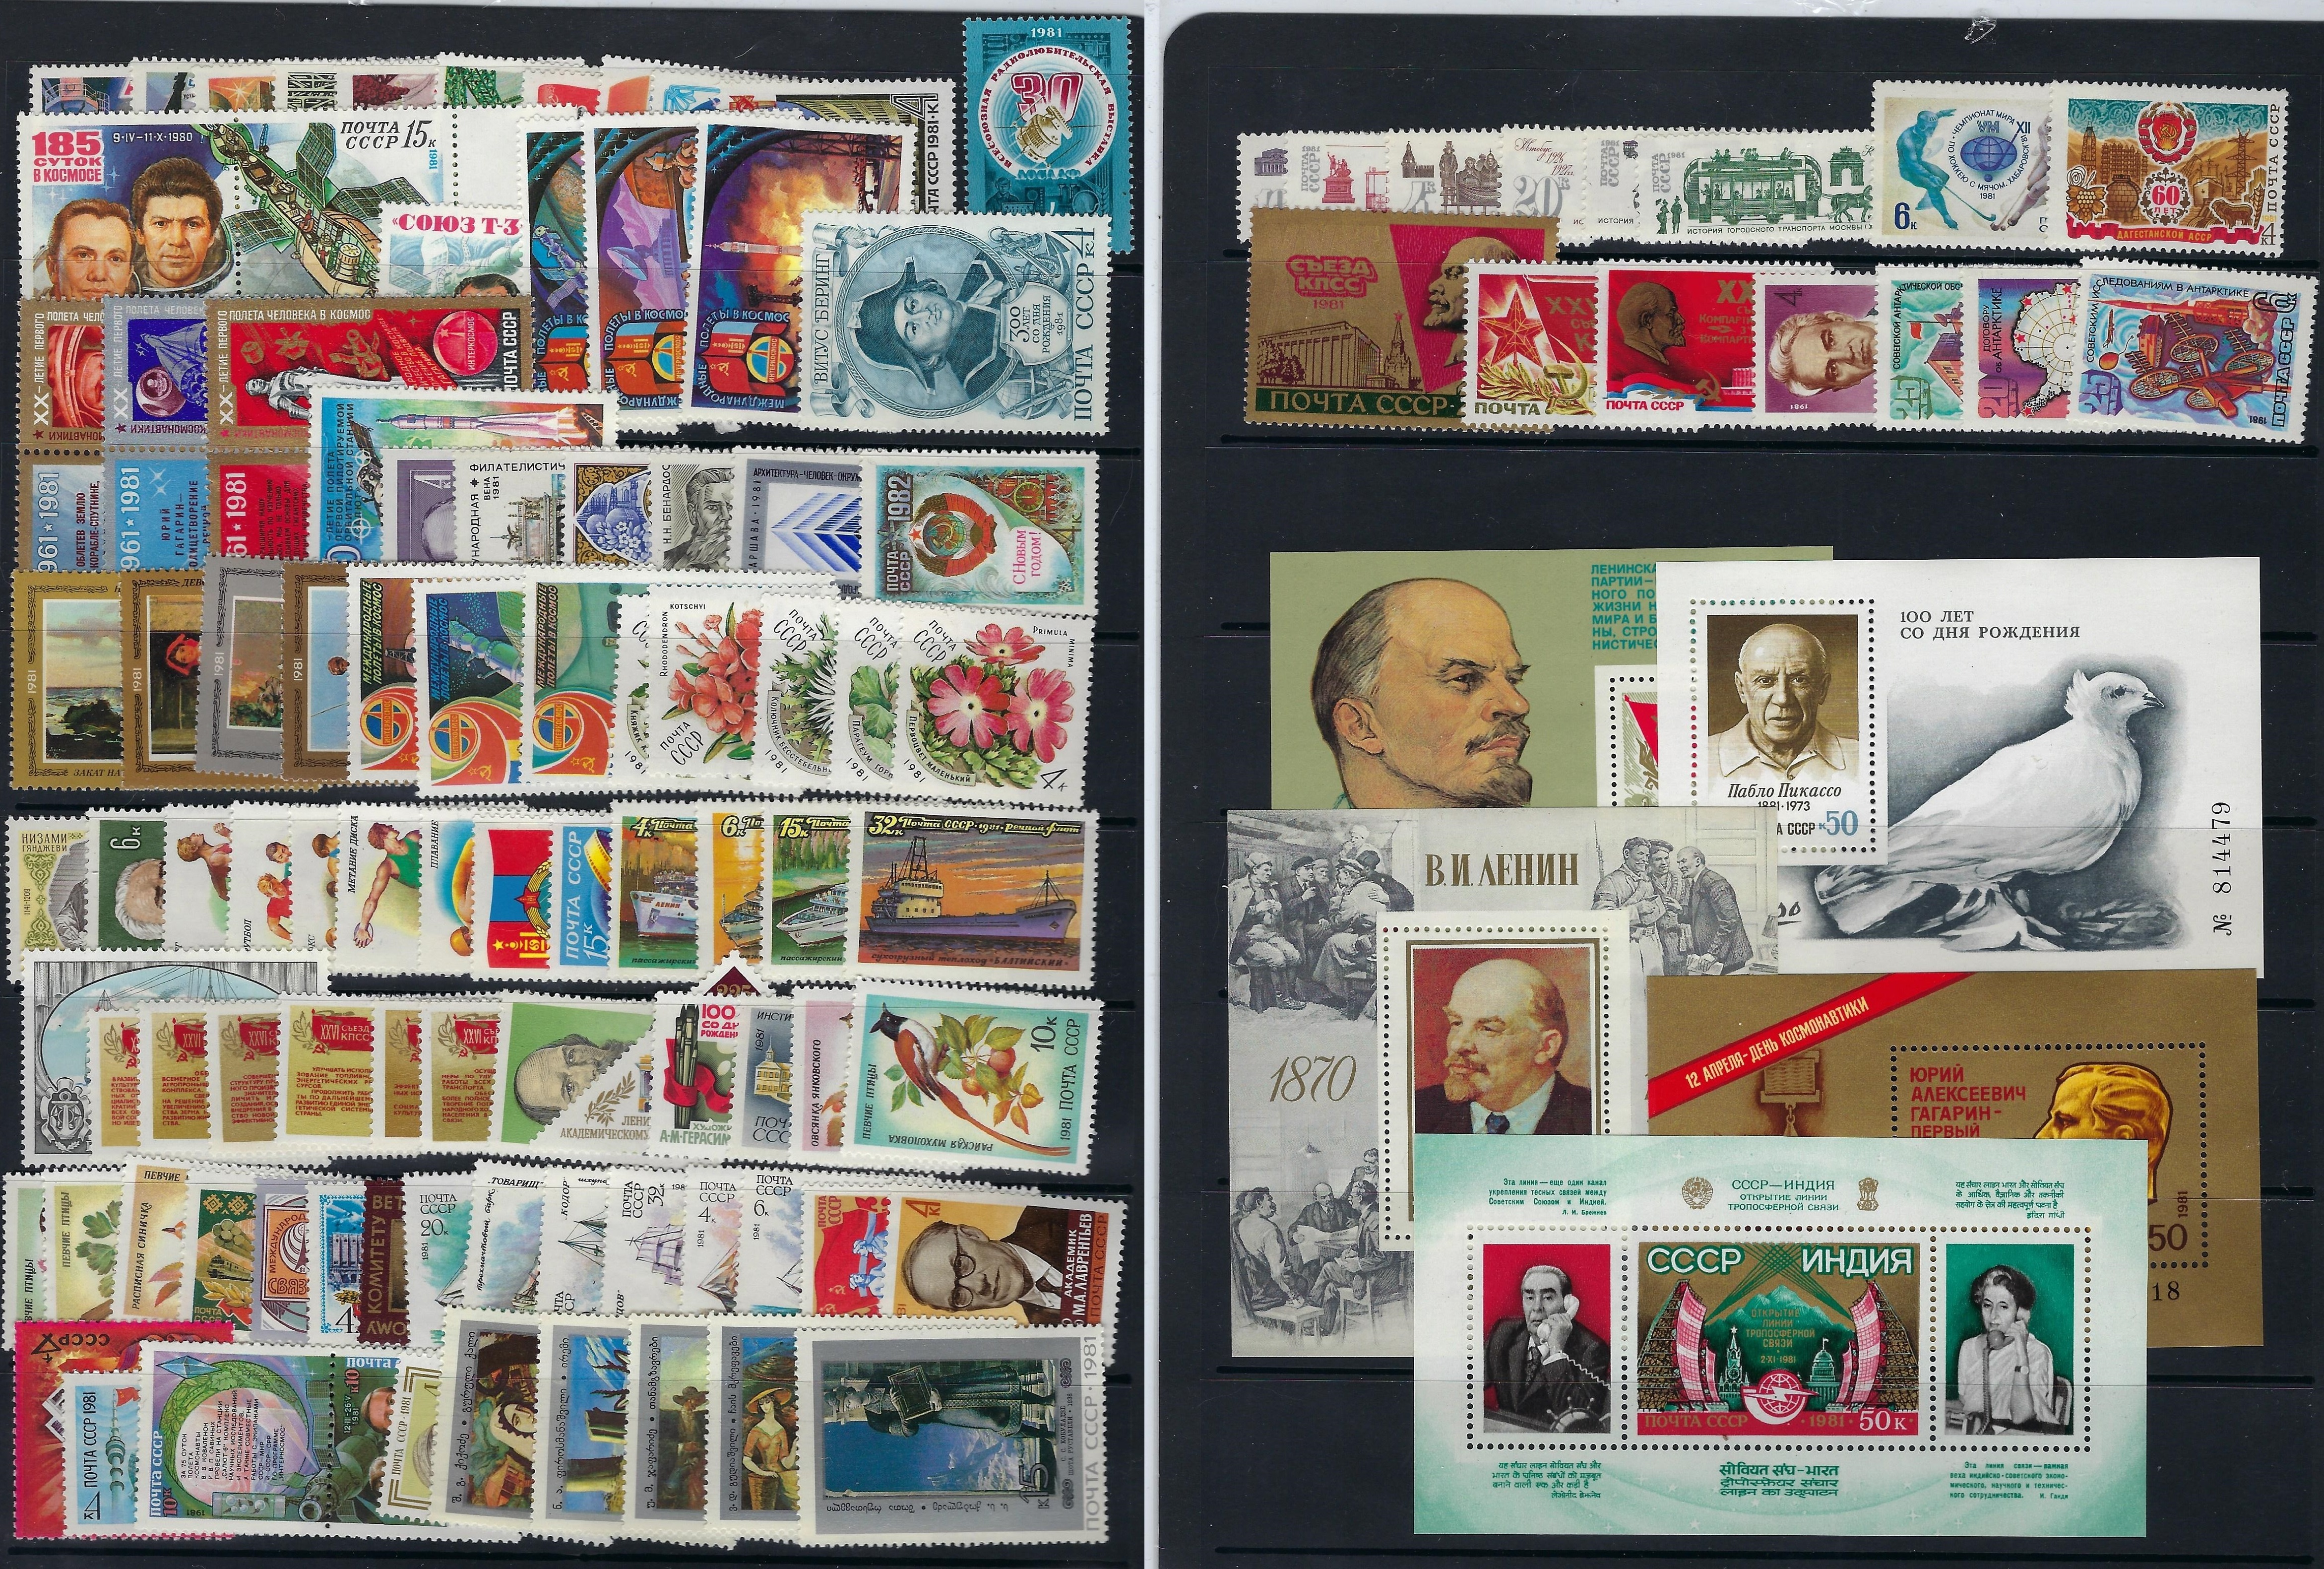 Russia - Year Sets RUSSIA YEAR SETS Scott 4897-5007 